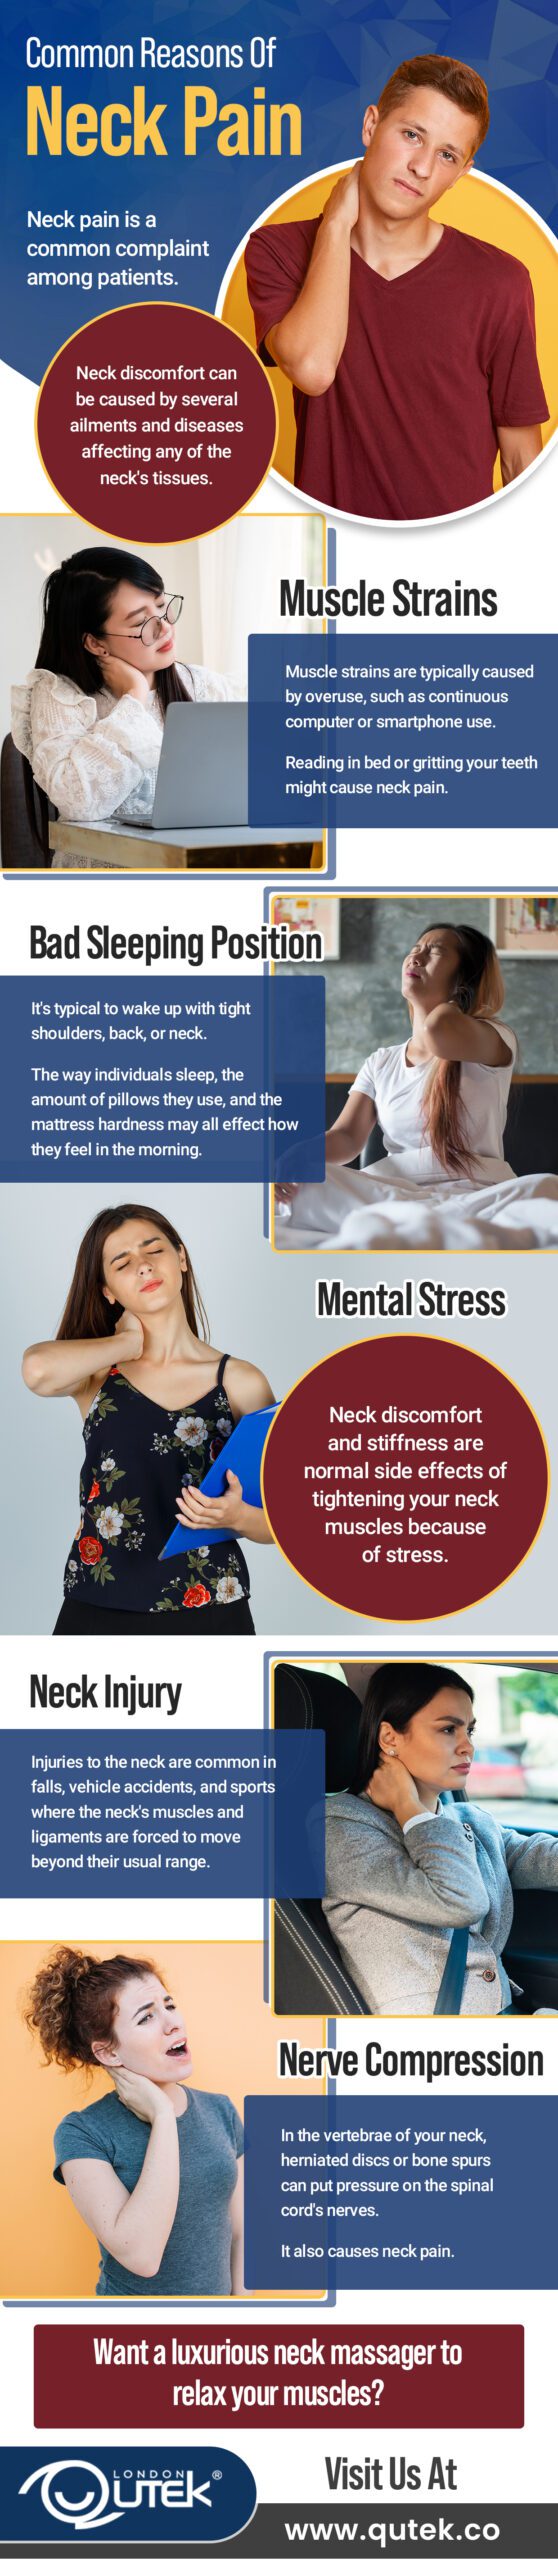 Common Reasons Of Neck Pain